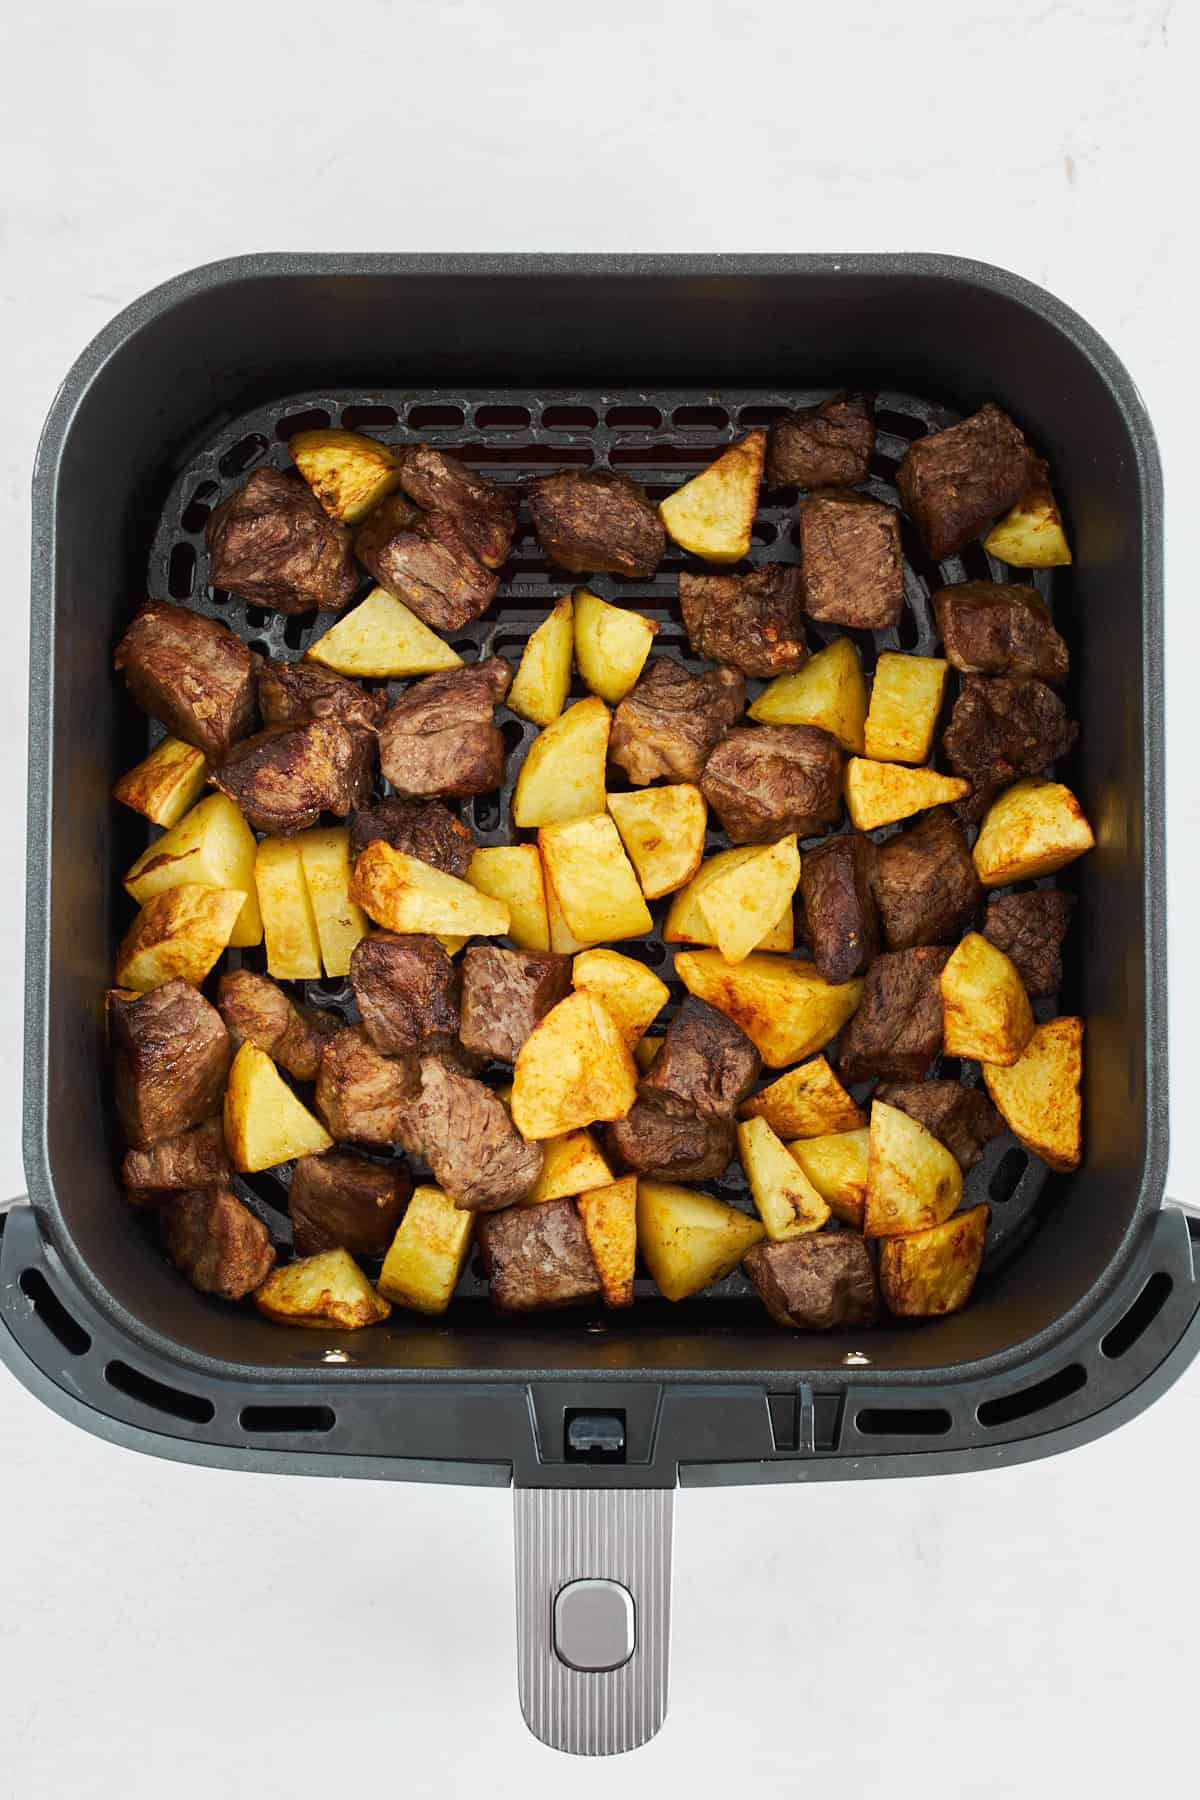 Cooked steak and potato pieces in an air fryer. 